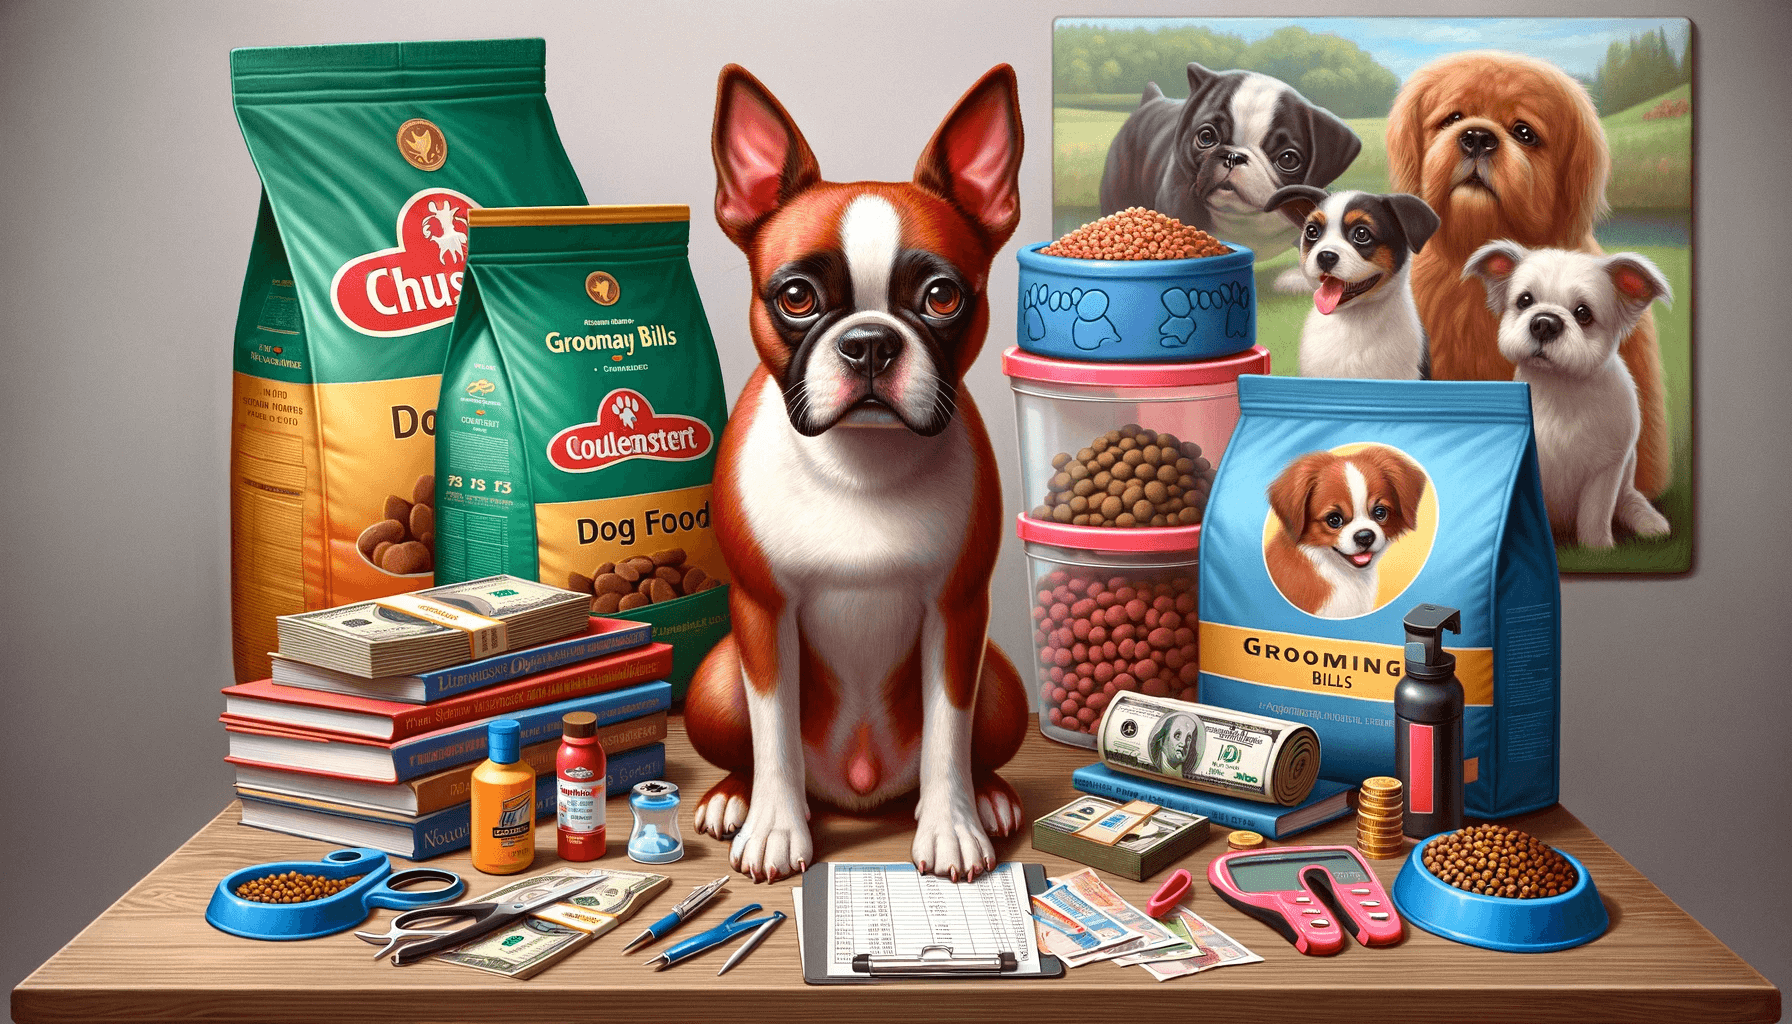 Cost Analysis for Owning a Red Boston Terrier